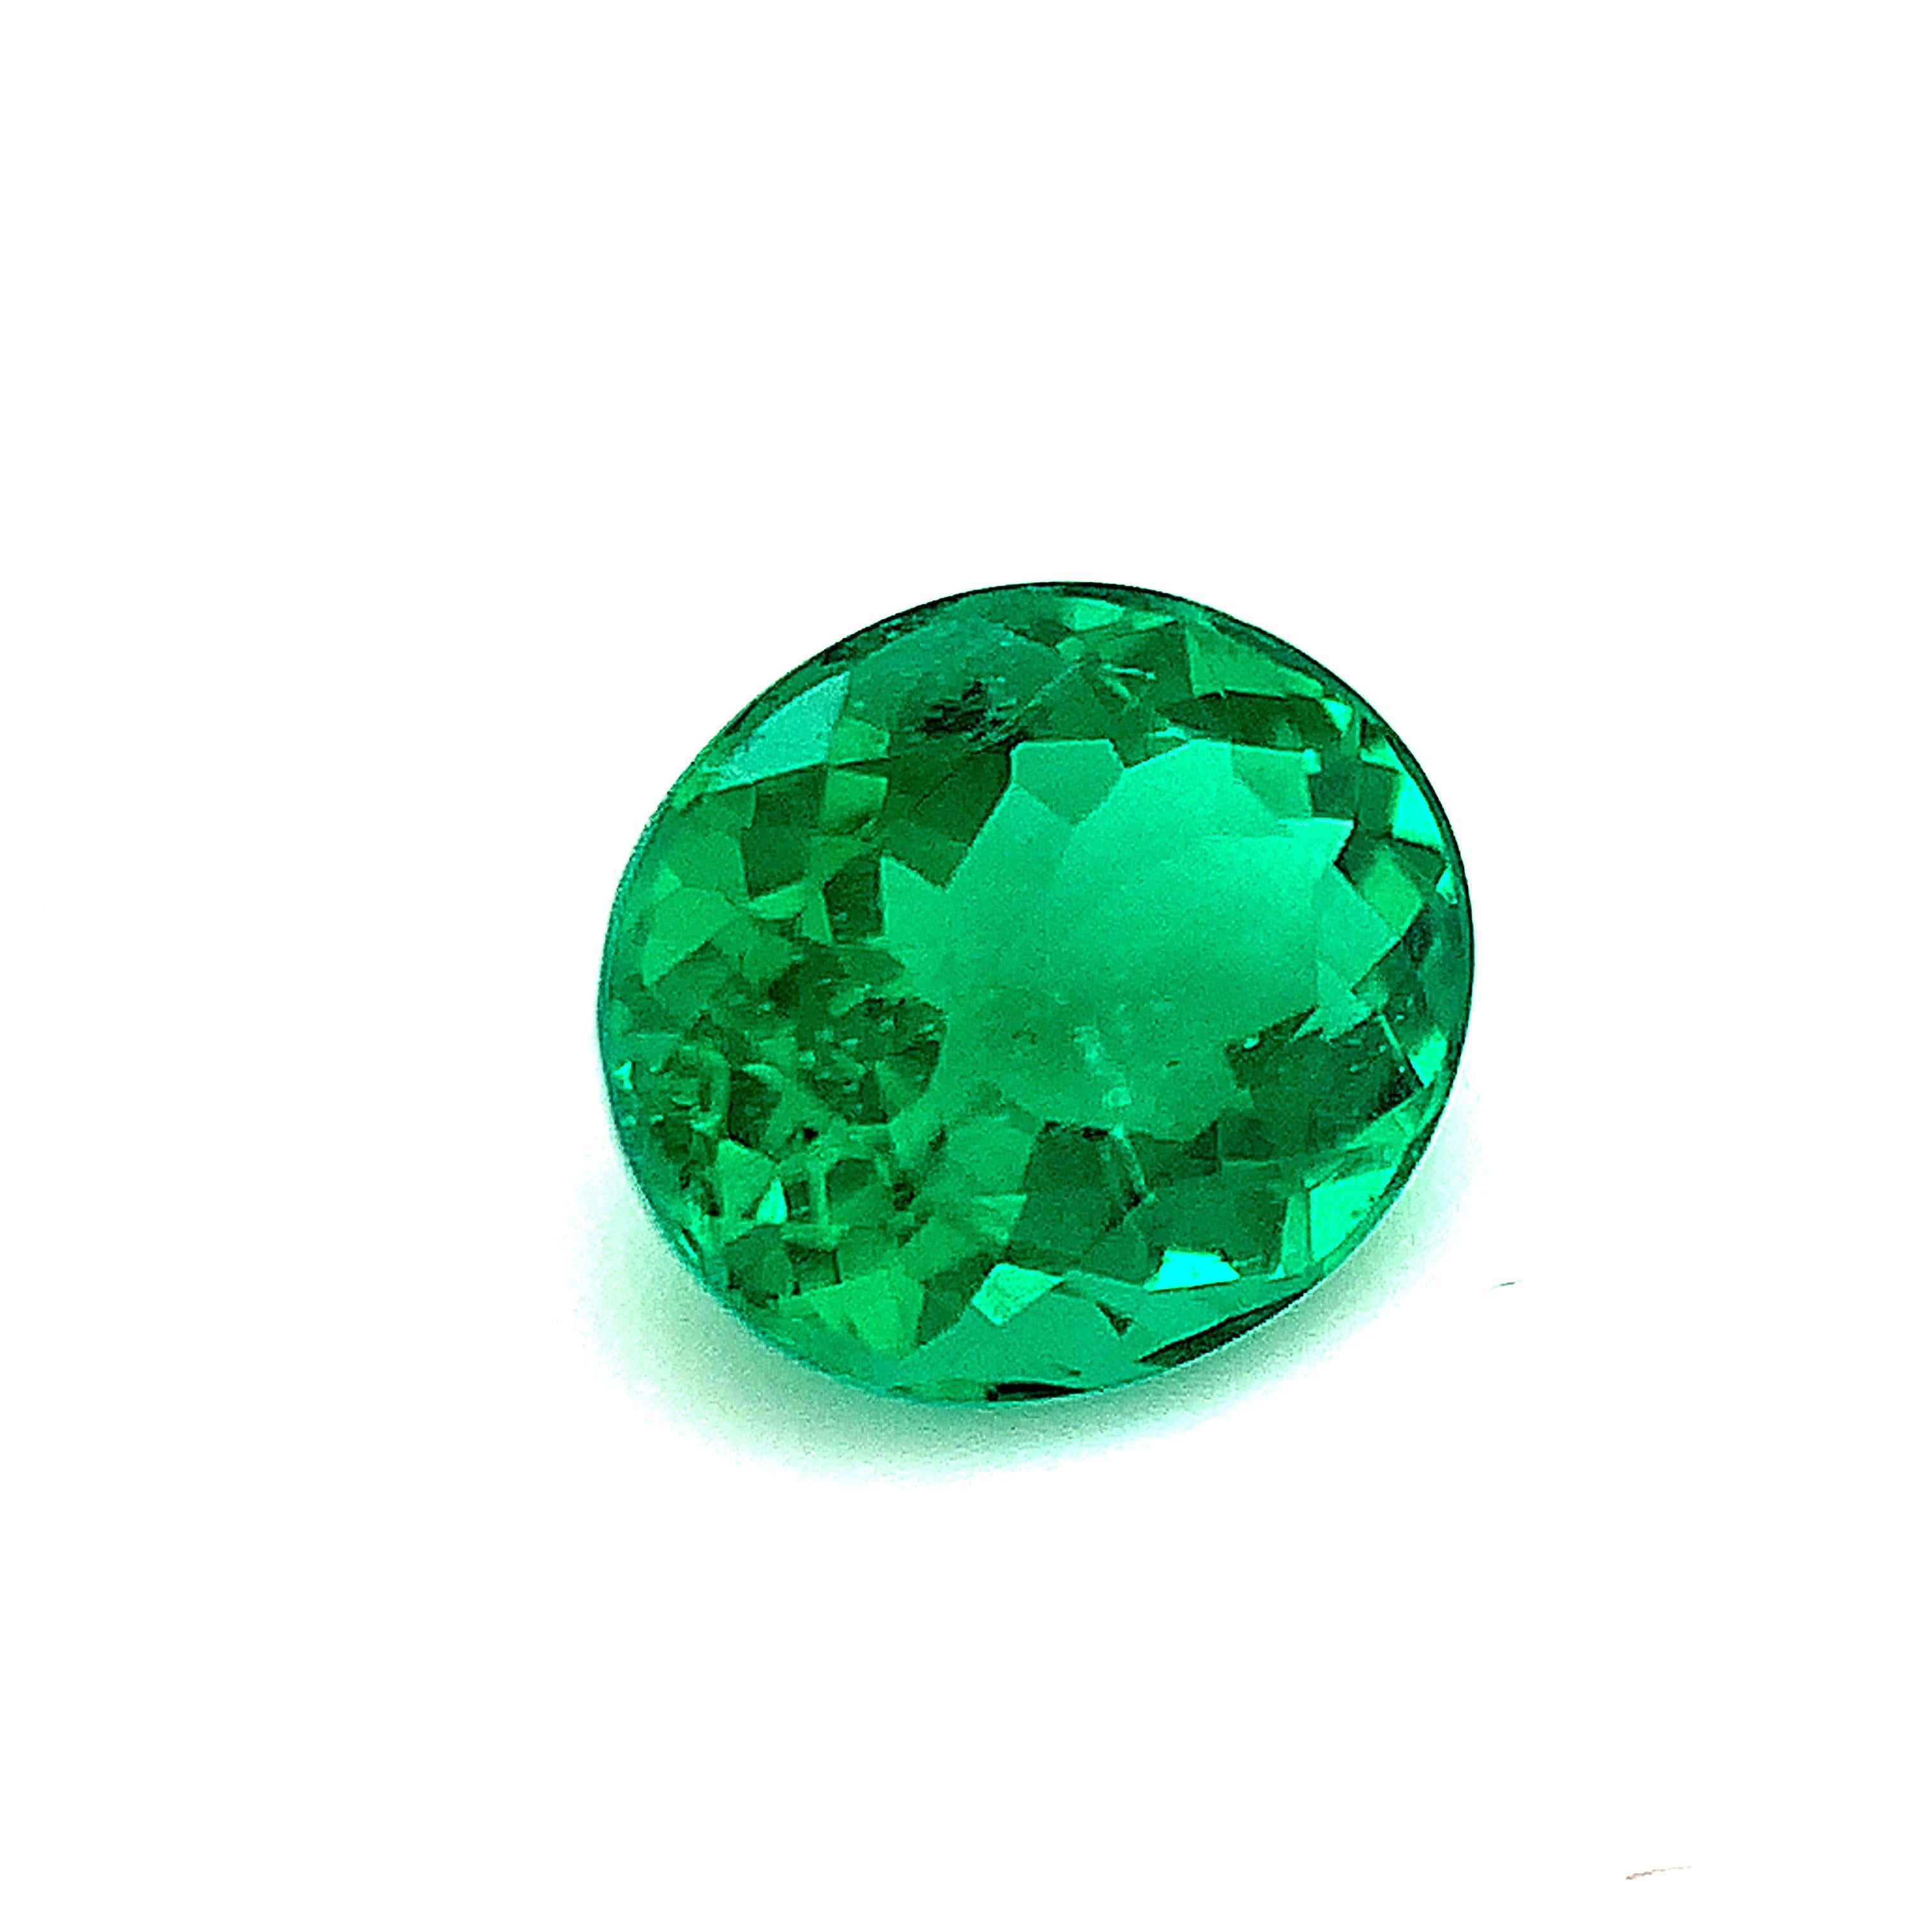 Oval Cut 1.37 Carat Emerald Oval, Unset Loose Gemstone, GIA Certified For Sale